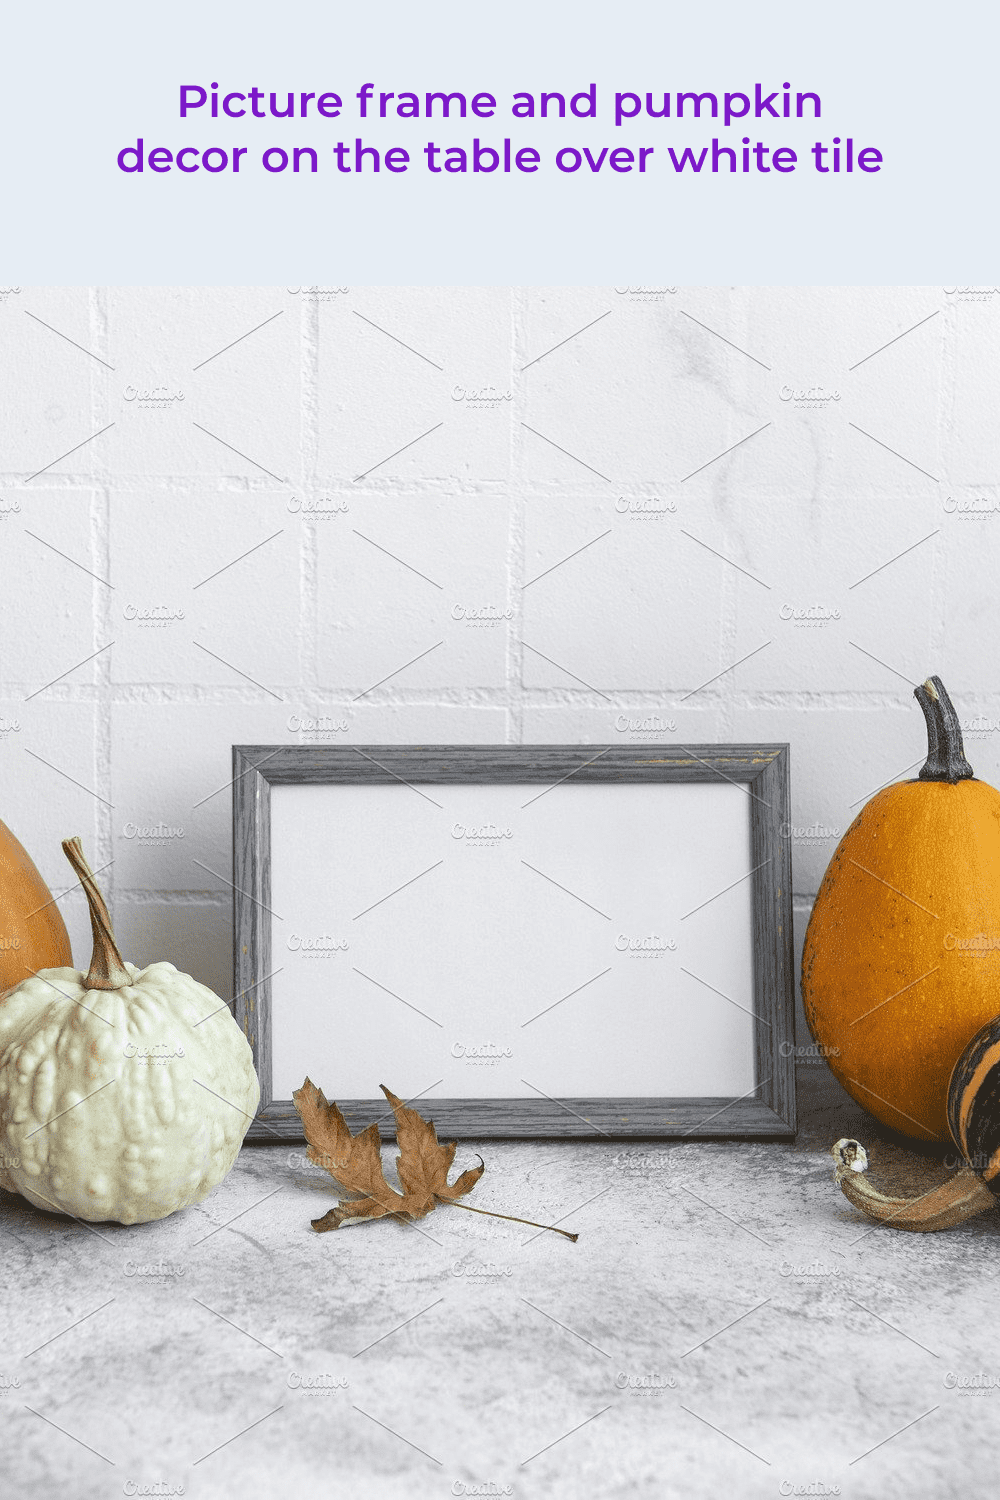 Picture frame and pumpkin decor on the table over white tile.